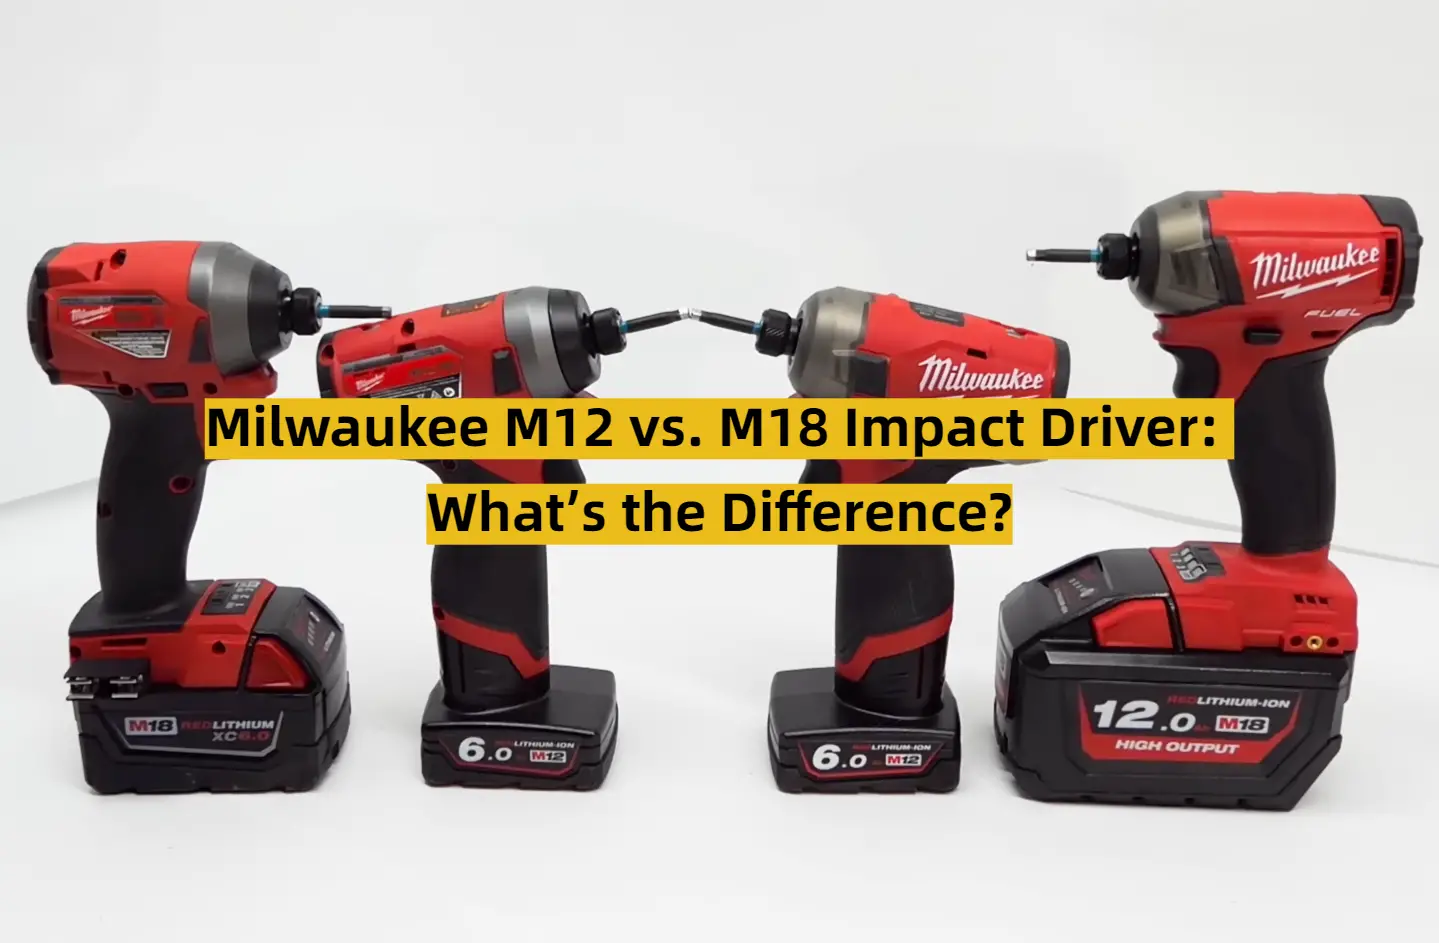 Milwaukee M12 vs. M18 Impact Driver: What’s the Difference?